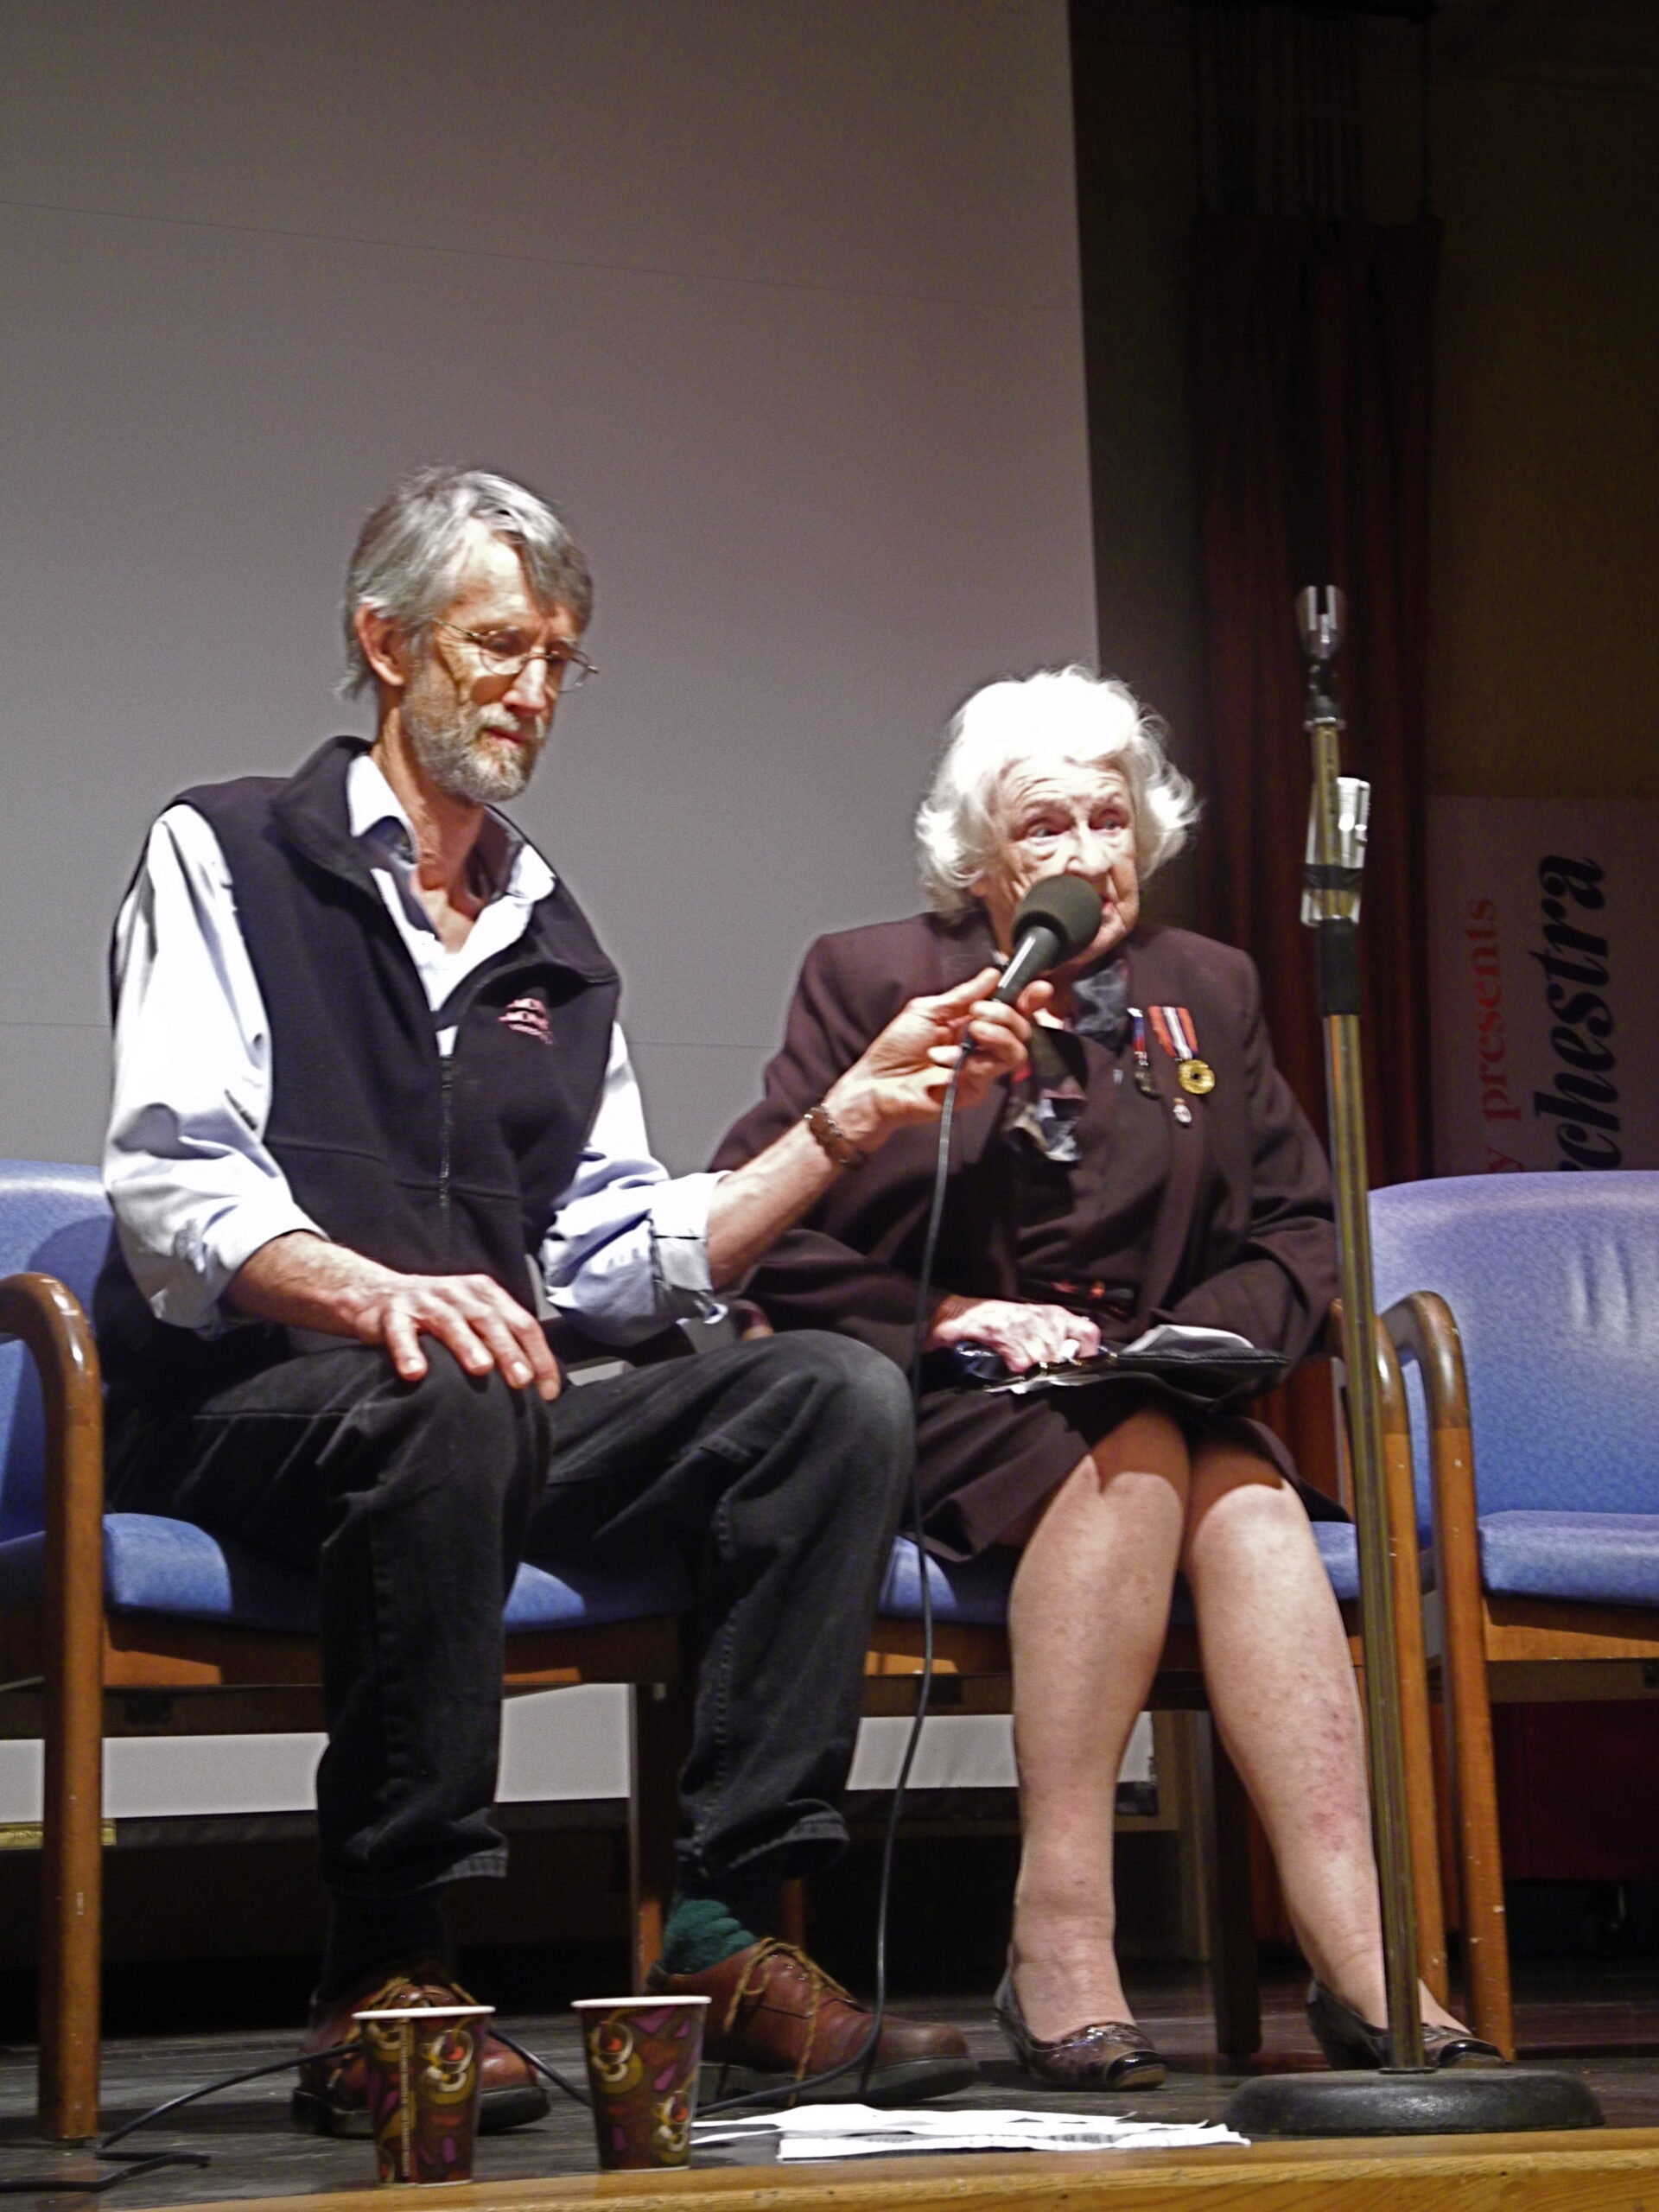 Nov 2015 Olive Bailey, one of the team that worked at Bletchley Park and with Alan Turing, was with us to watch the documentary "Codebreaker" and to entertain us about her WWII experiences as a codebreaker. [Audio of her presentation in the AUDIO section below]